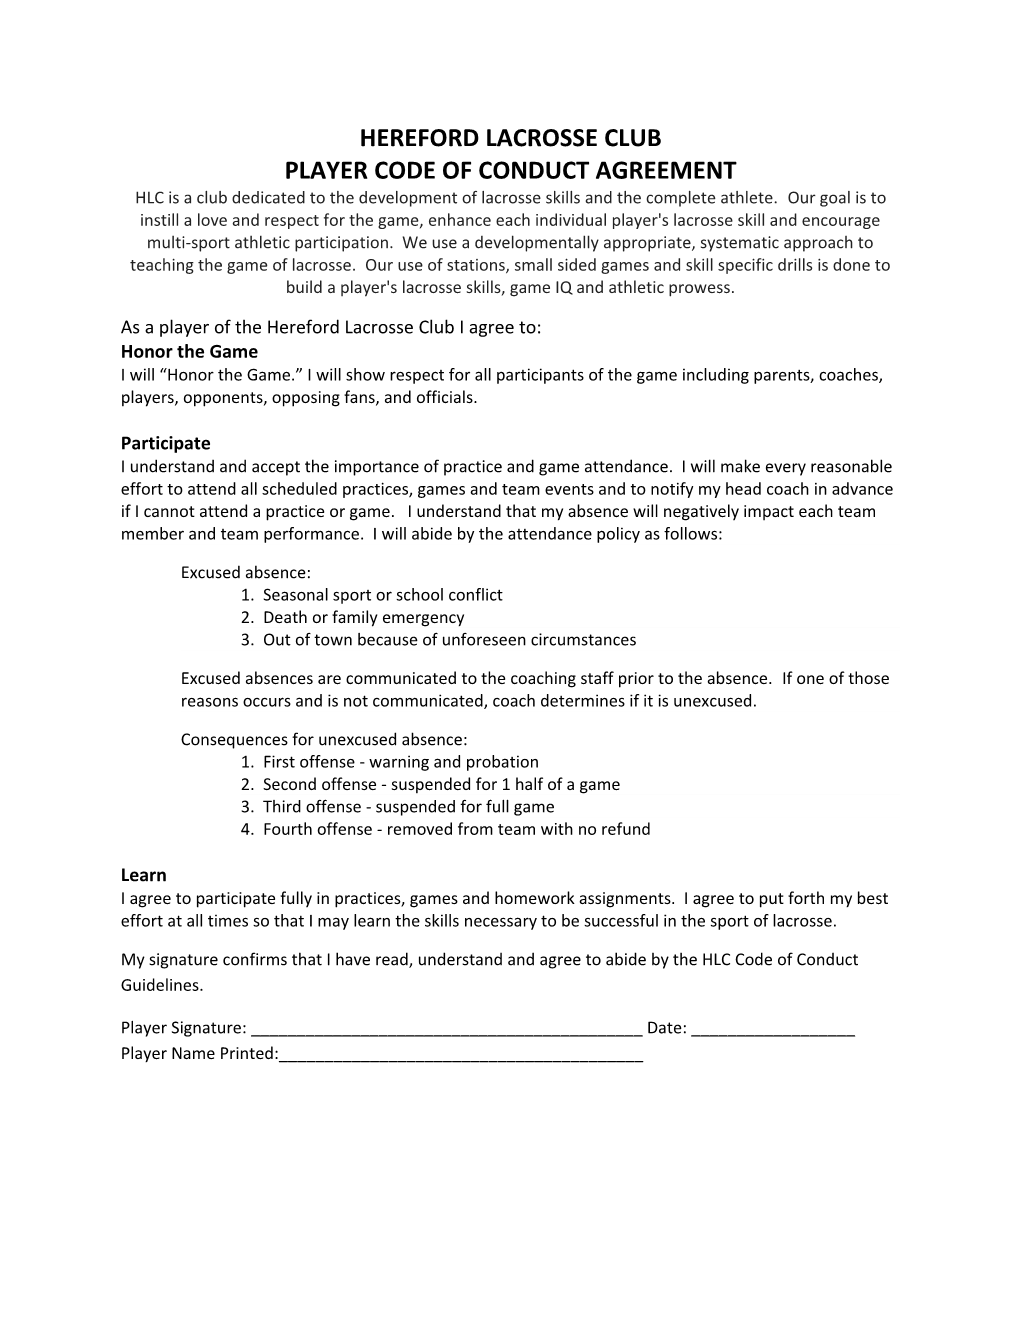 Player Code of Conduct Agreement